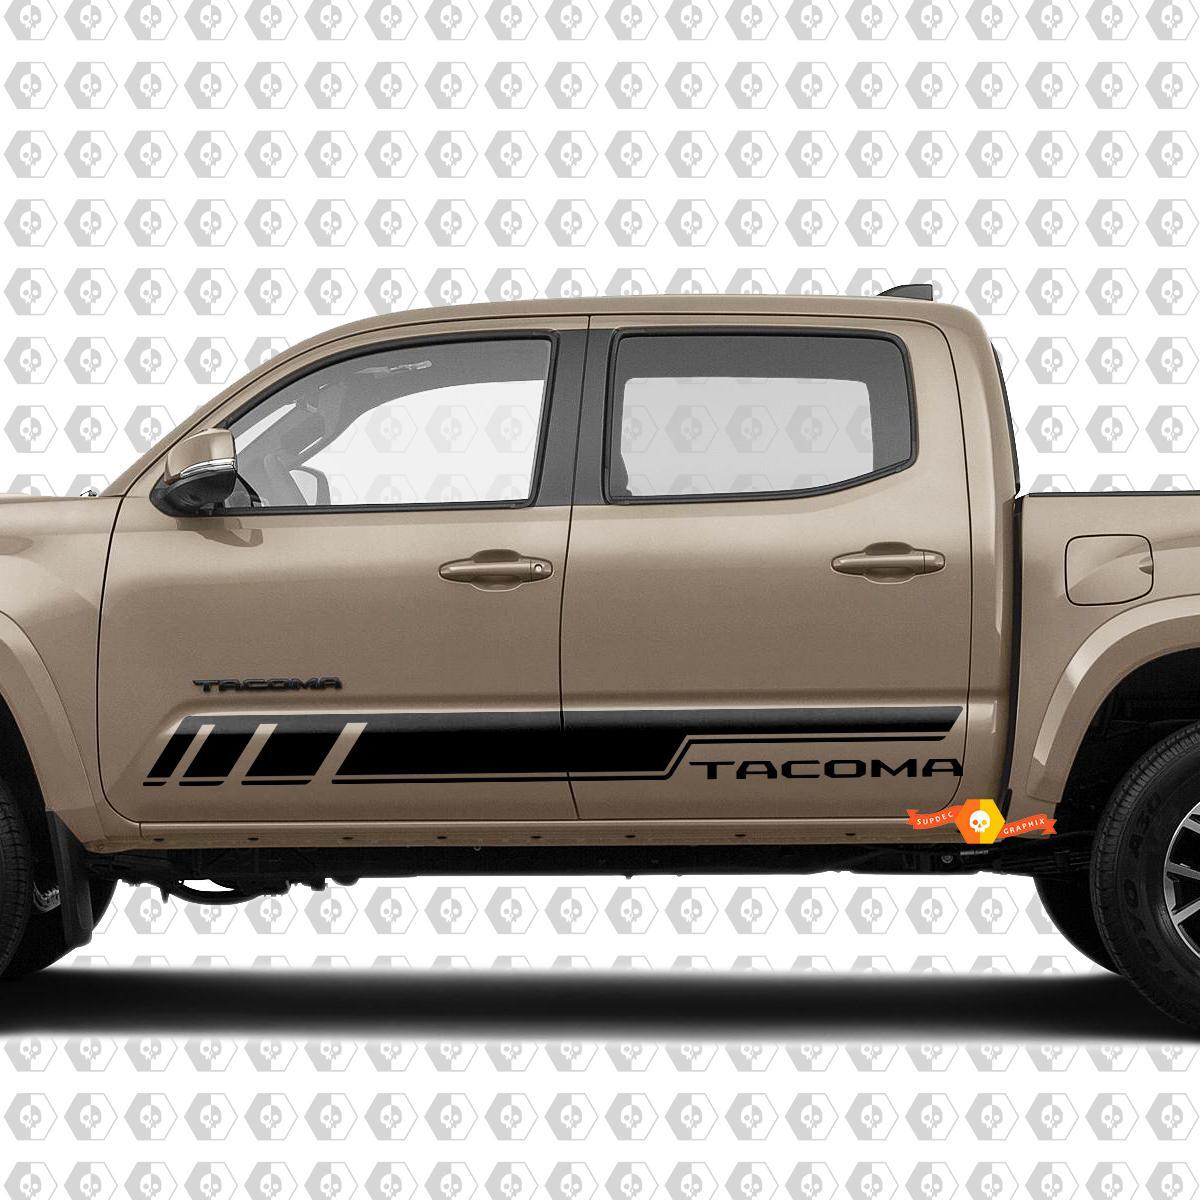 Pair Stripes for Tacoma Side Rocker Panel Vinyl Stickers Decal fit to Toyota Tacoma TRD Off Road Pro Sport